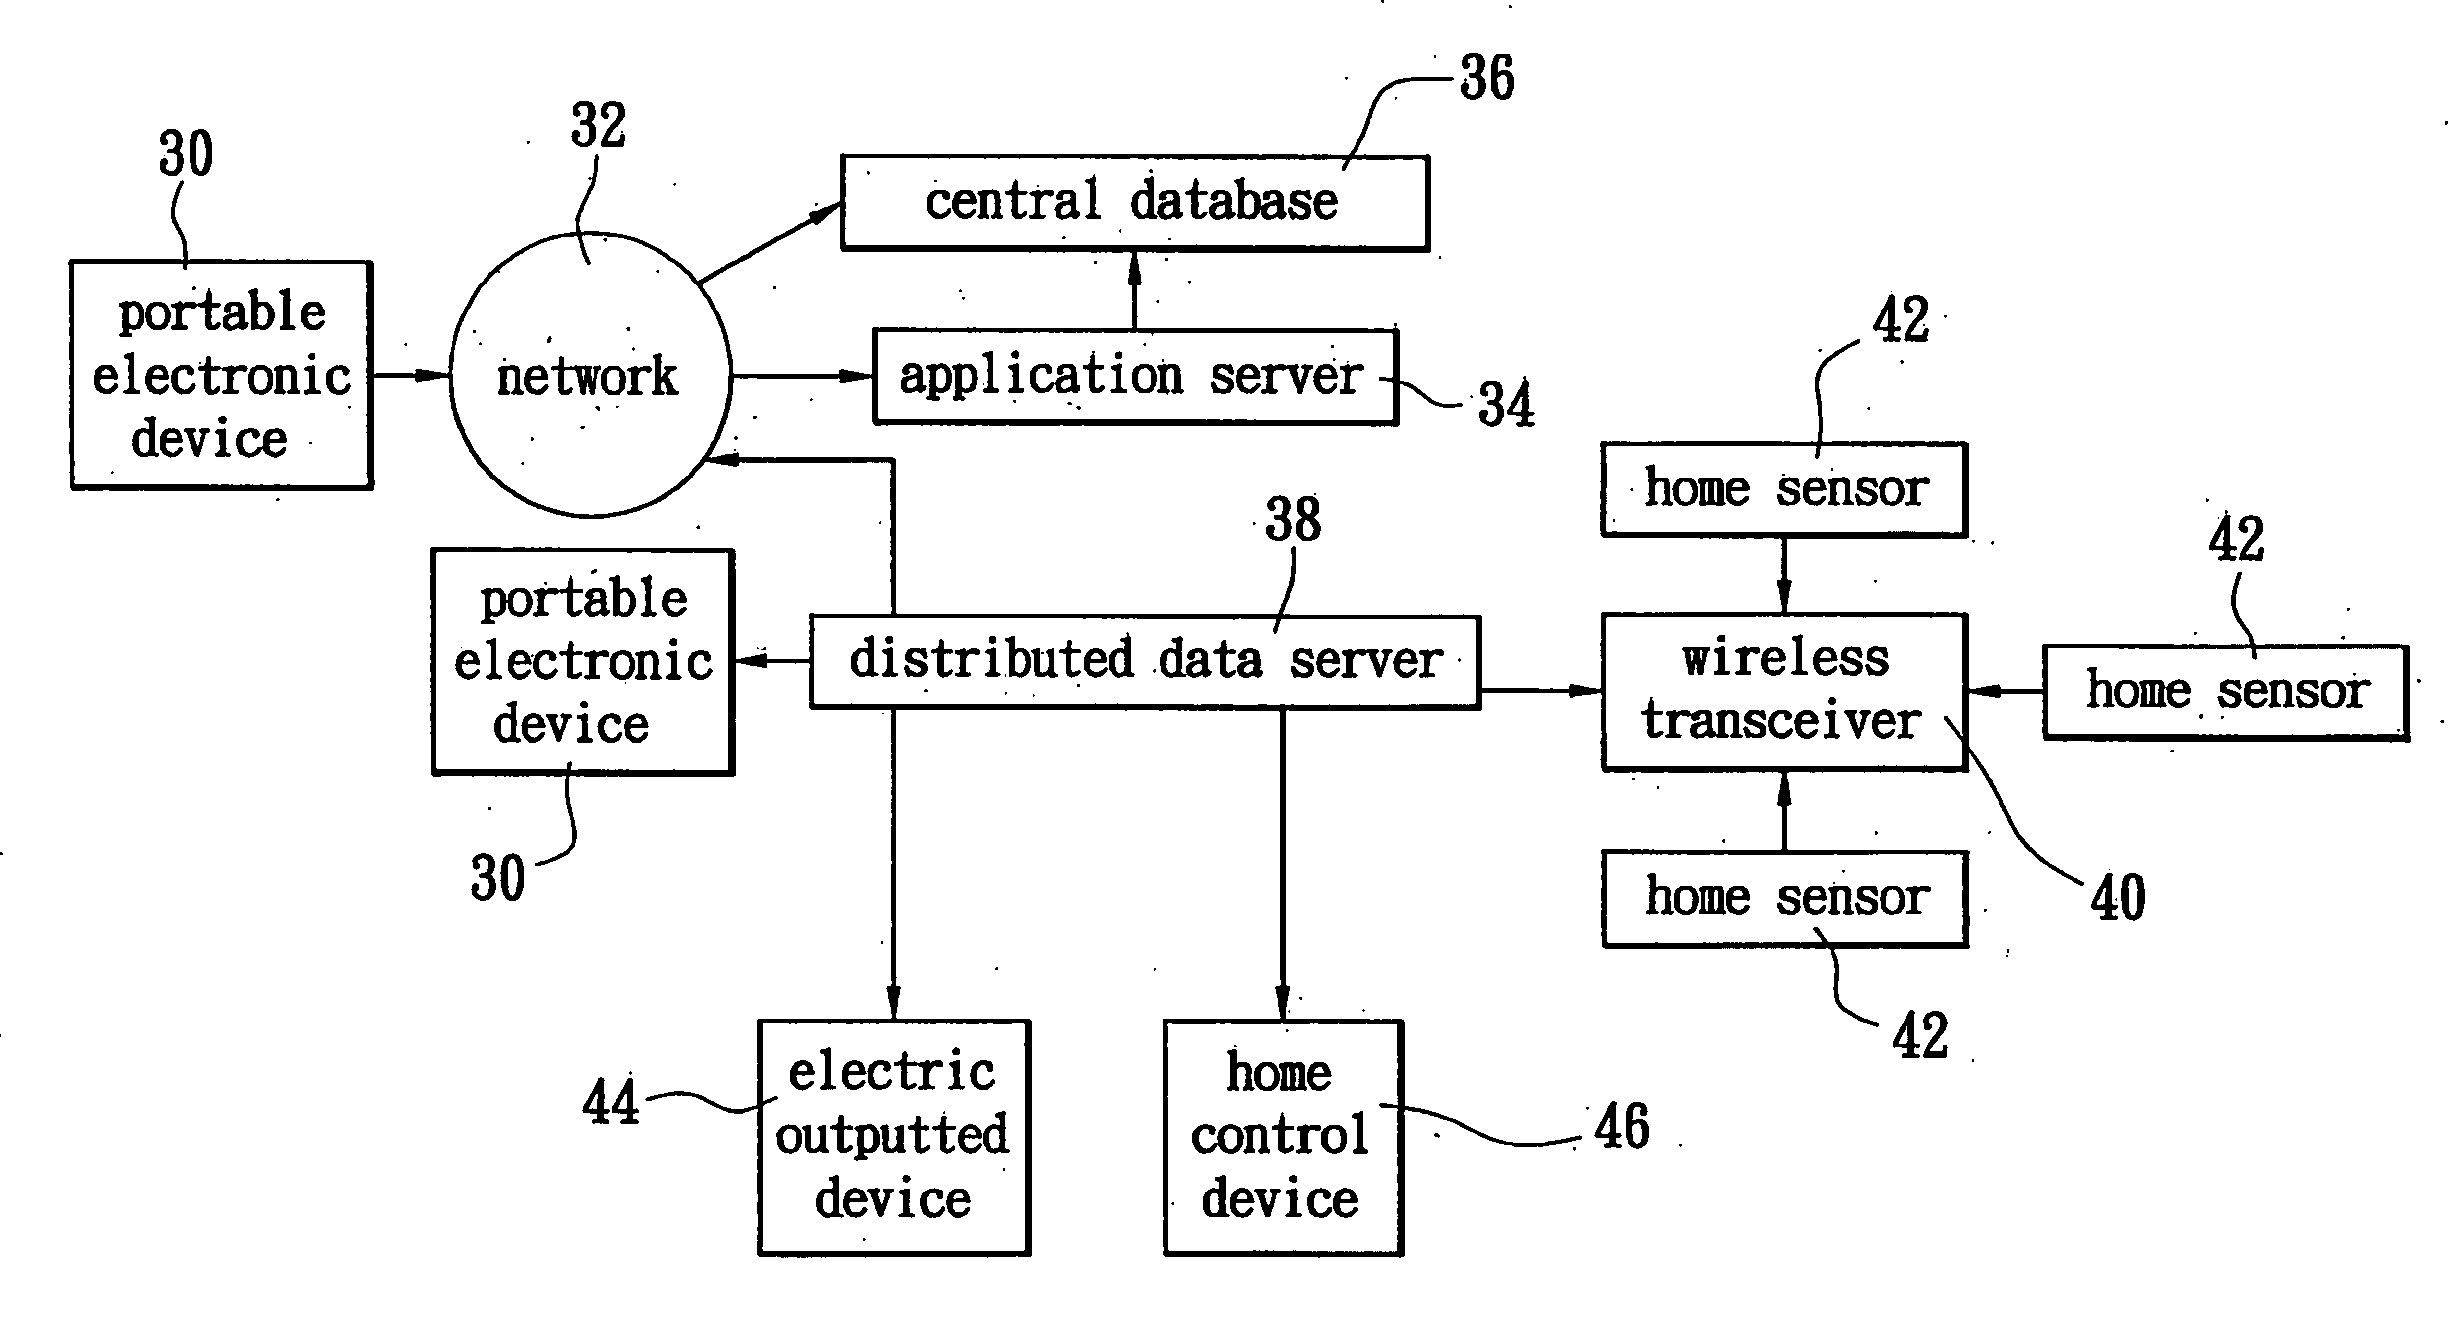 Portable tele-homecare monitoring system and method for the same